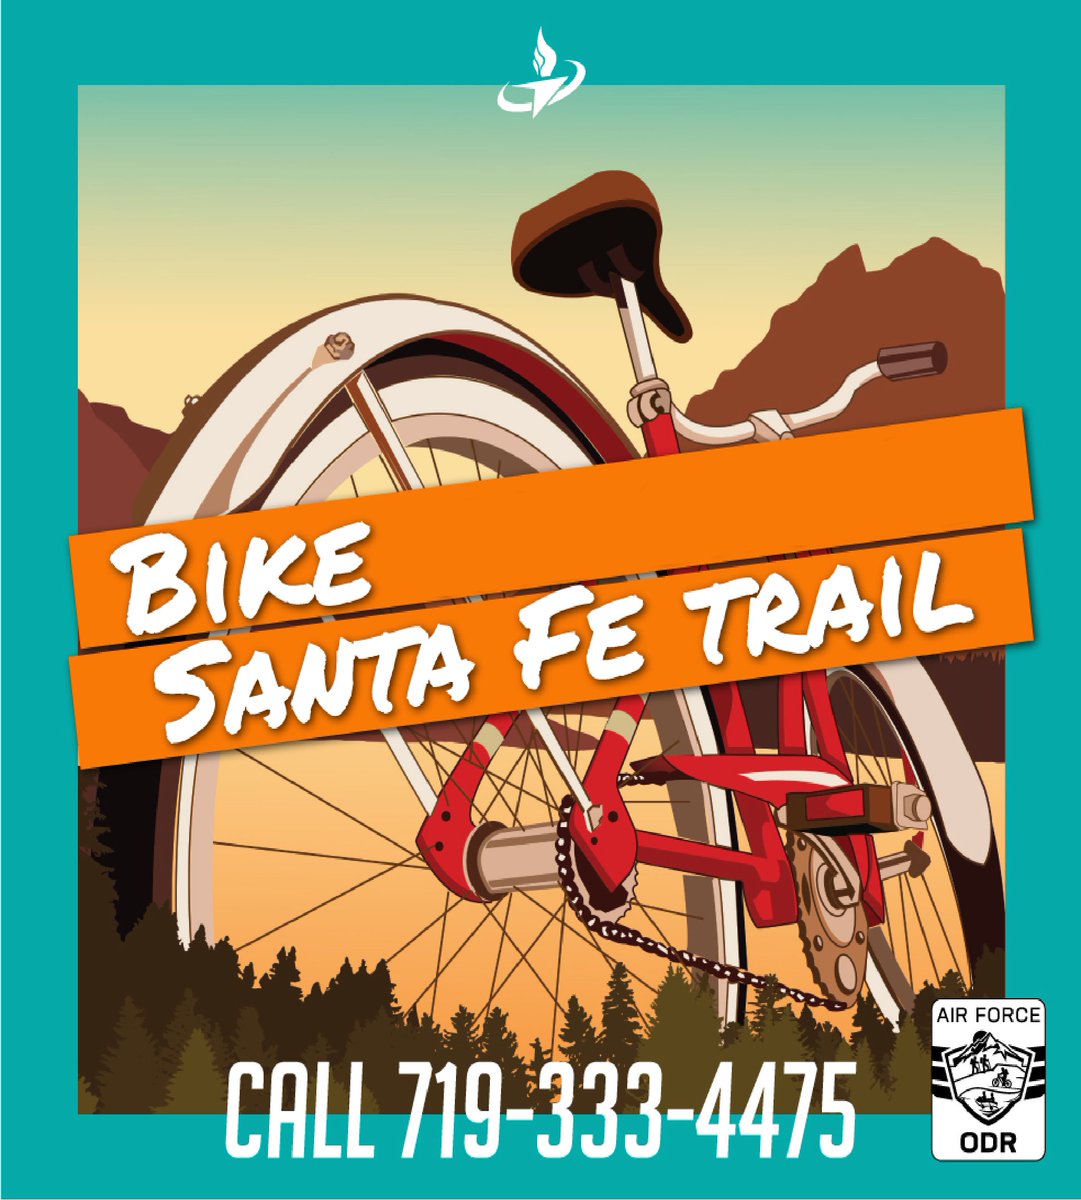 Aug 31 Ages 12+ $5 /person, kids under 16 are FREE but still must sign up. #bikelife #bike #mountainbike #usafa